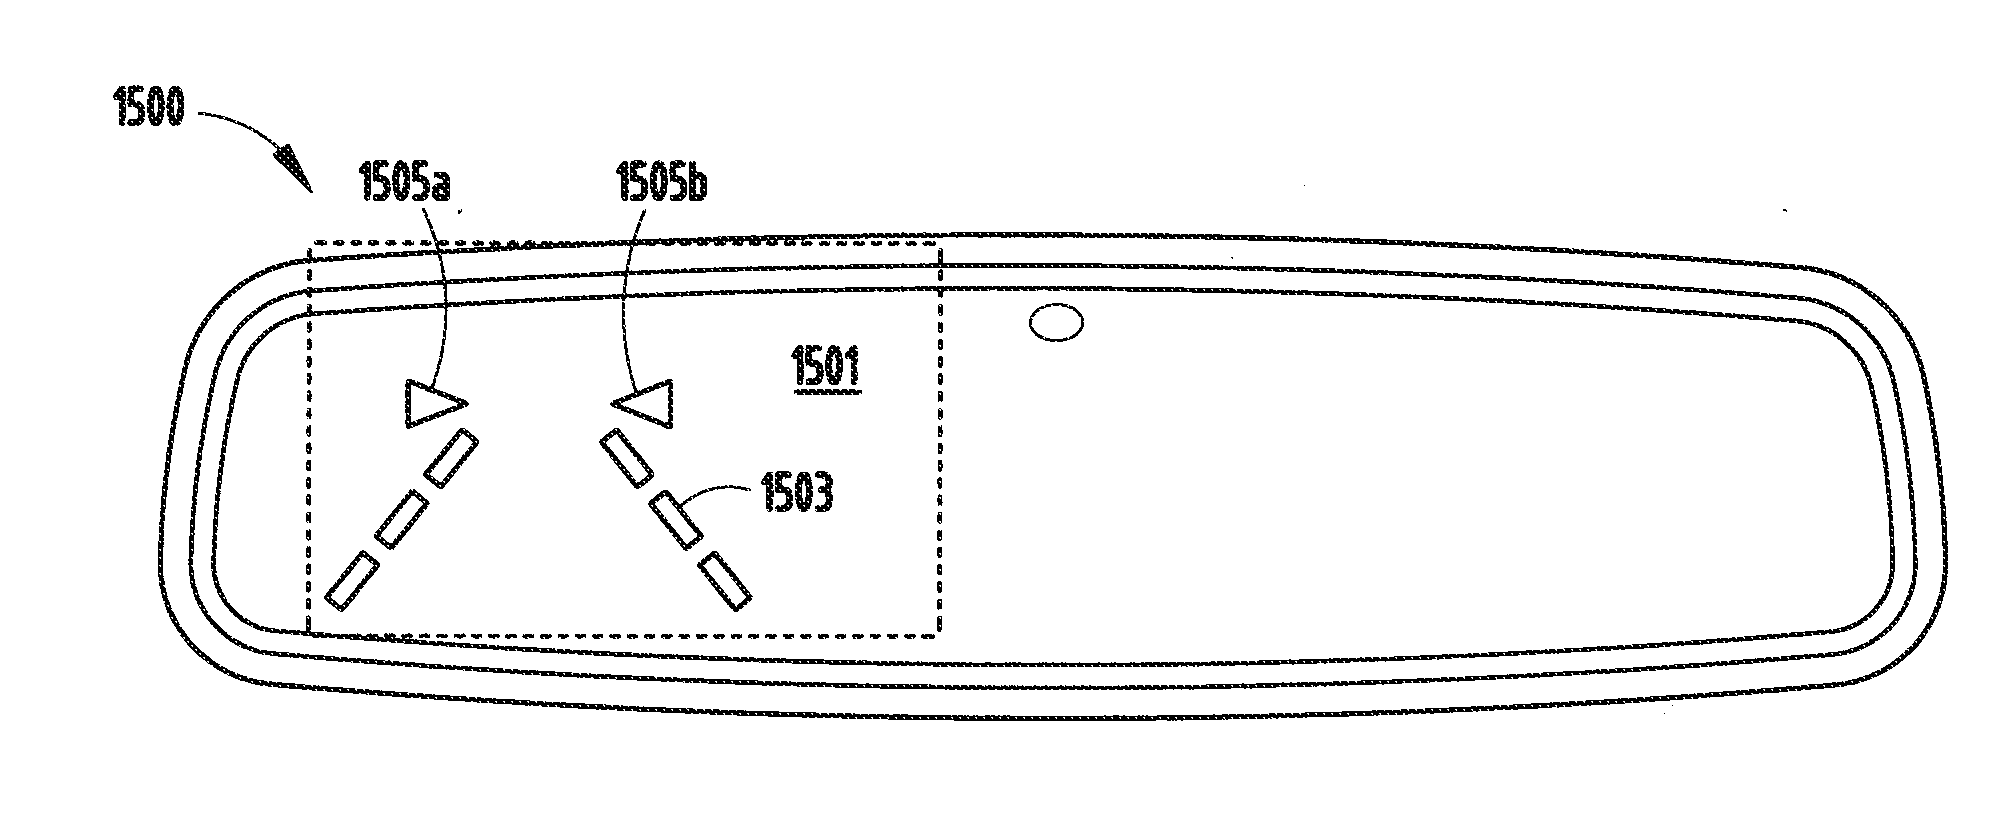 Multi-display mirror system and method for expanded view around a vehicle